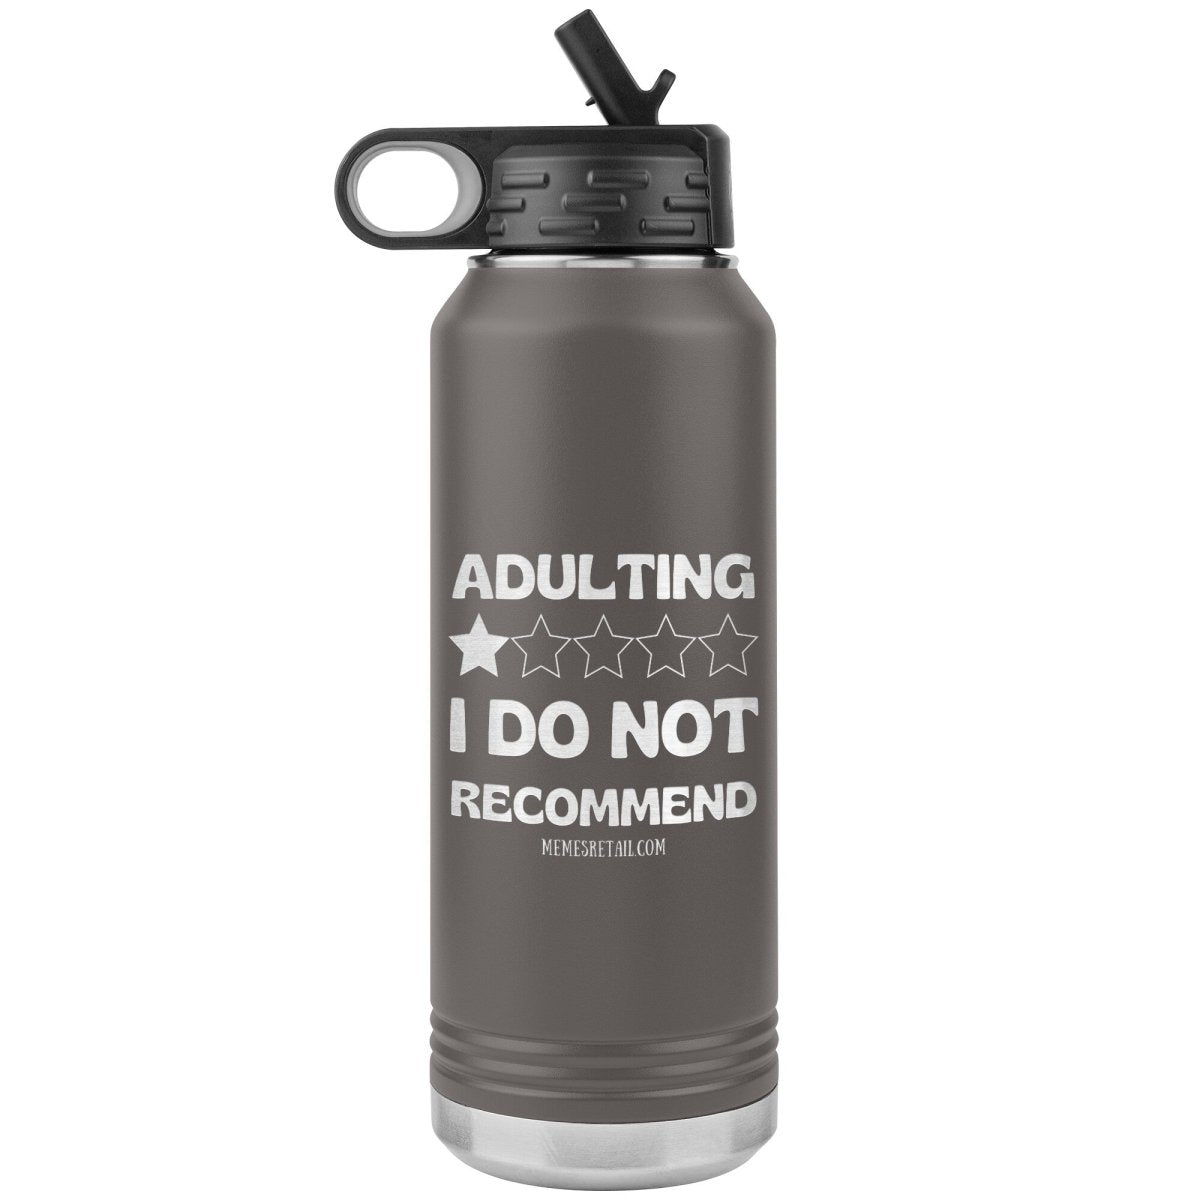 Adulting, 1 Star, I do not recommend 32oz Water Tumblers, Pewter - MemesRetail.com